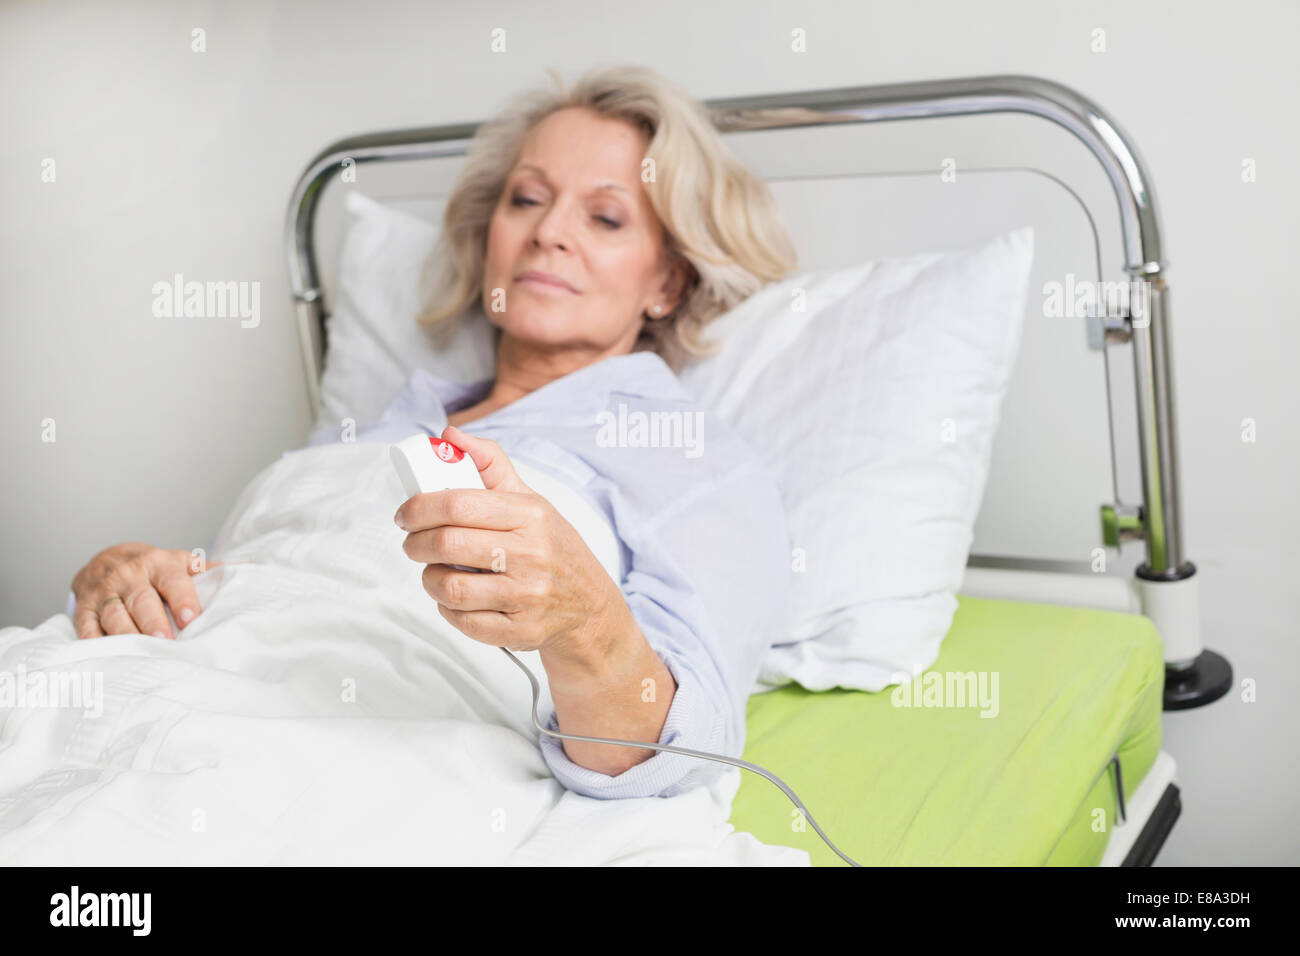 Patient in hospital ringing for nurse Stock Photo